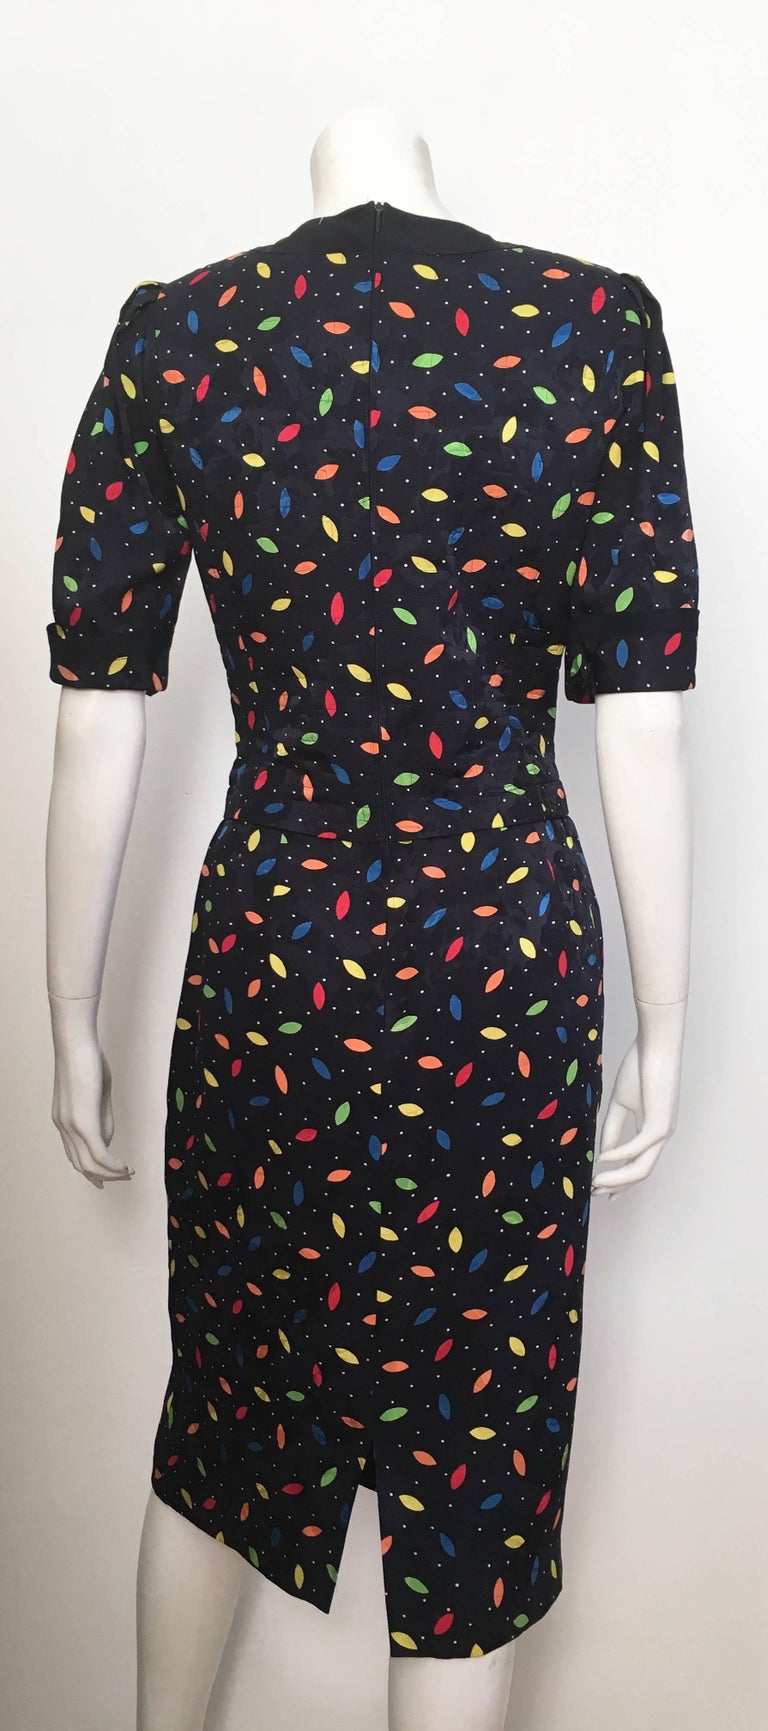 Louis Feraud 1980s Silk Navy Dress Size 6. Never Worn. For Sale at 1stdibs